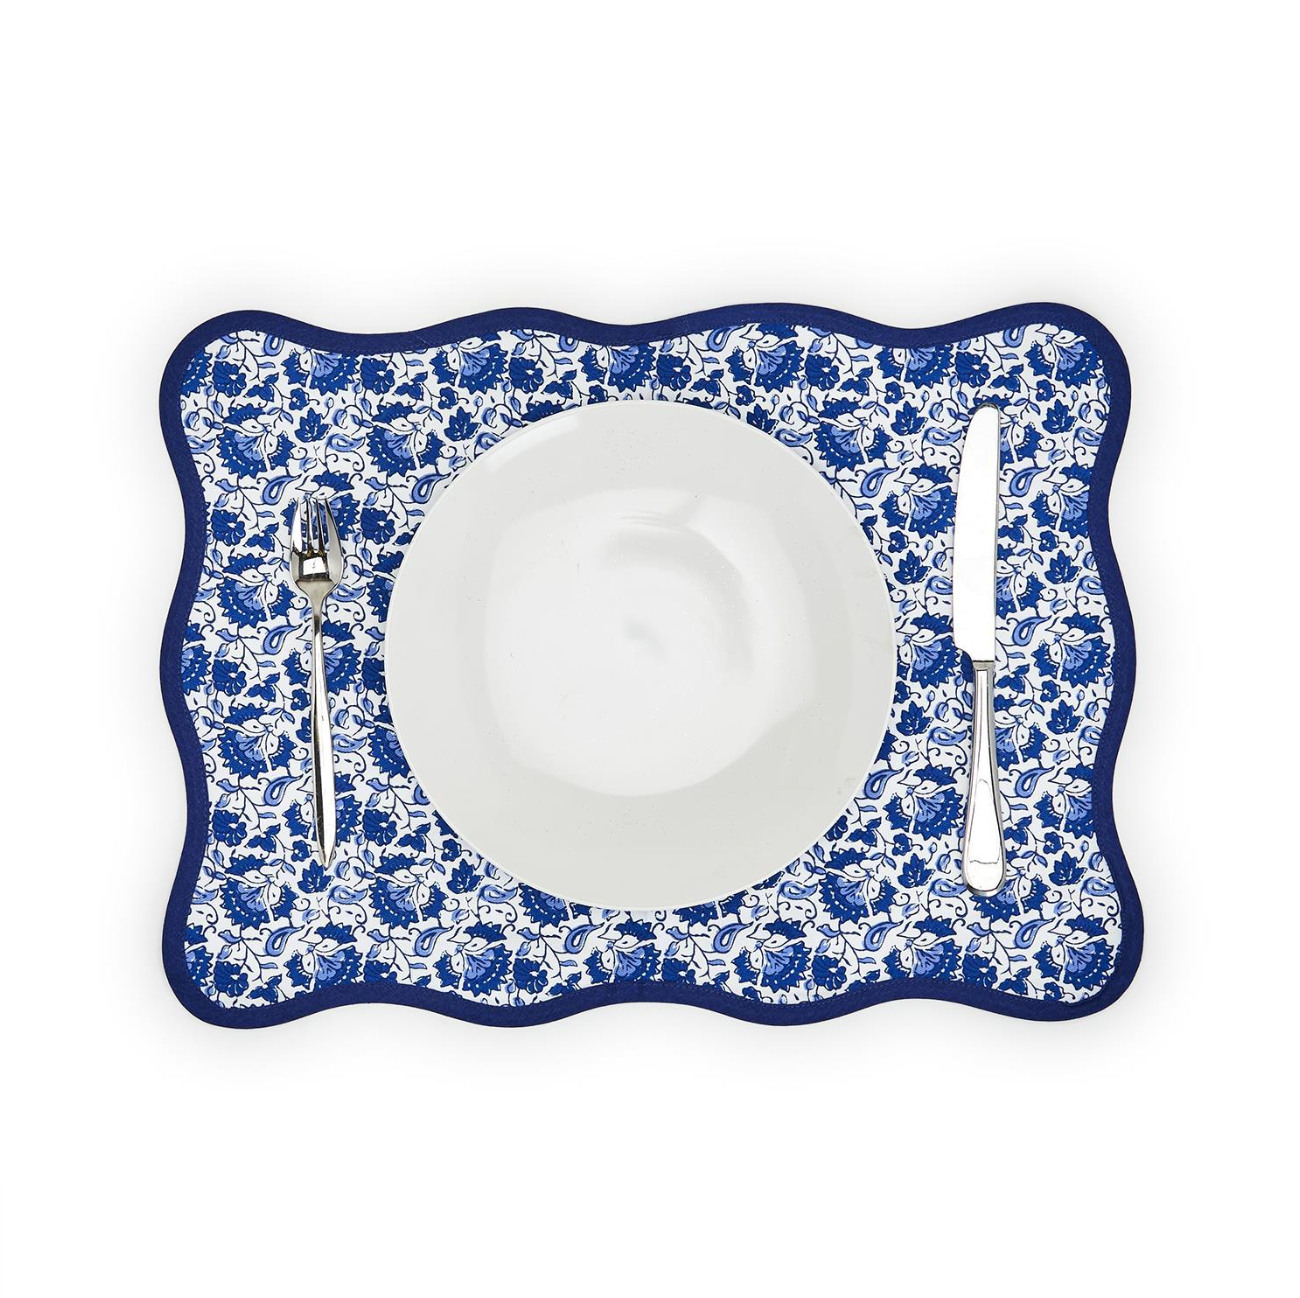 Chinoiserie Blue Floral Placemats